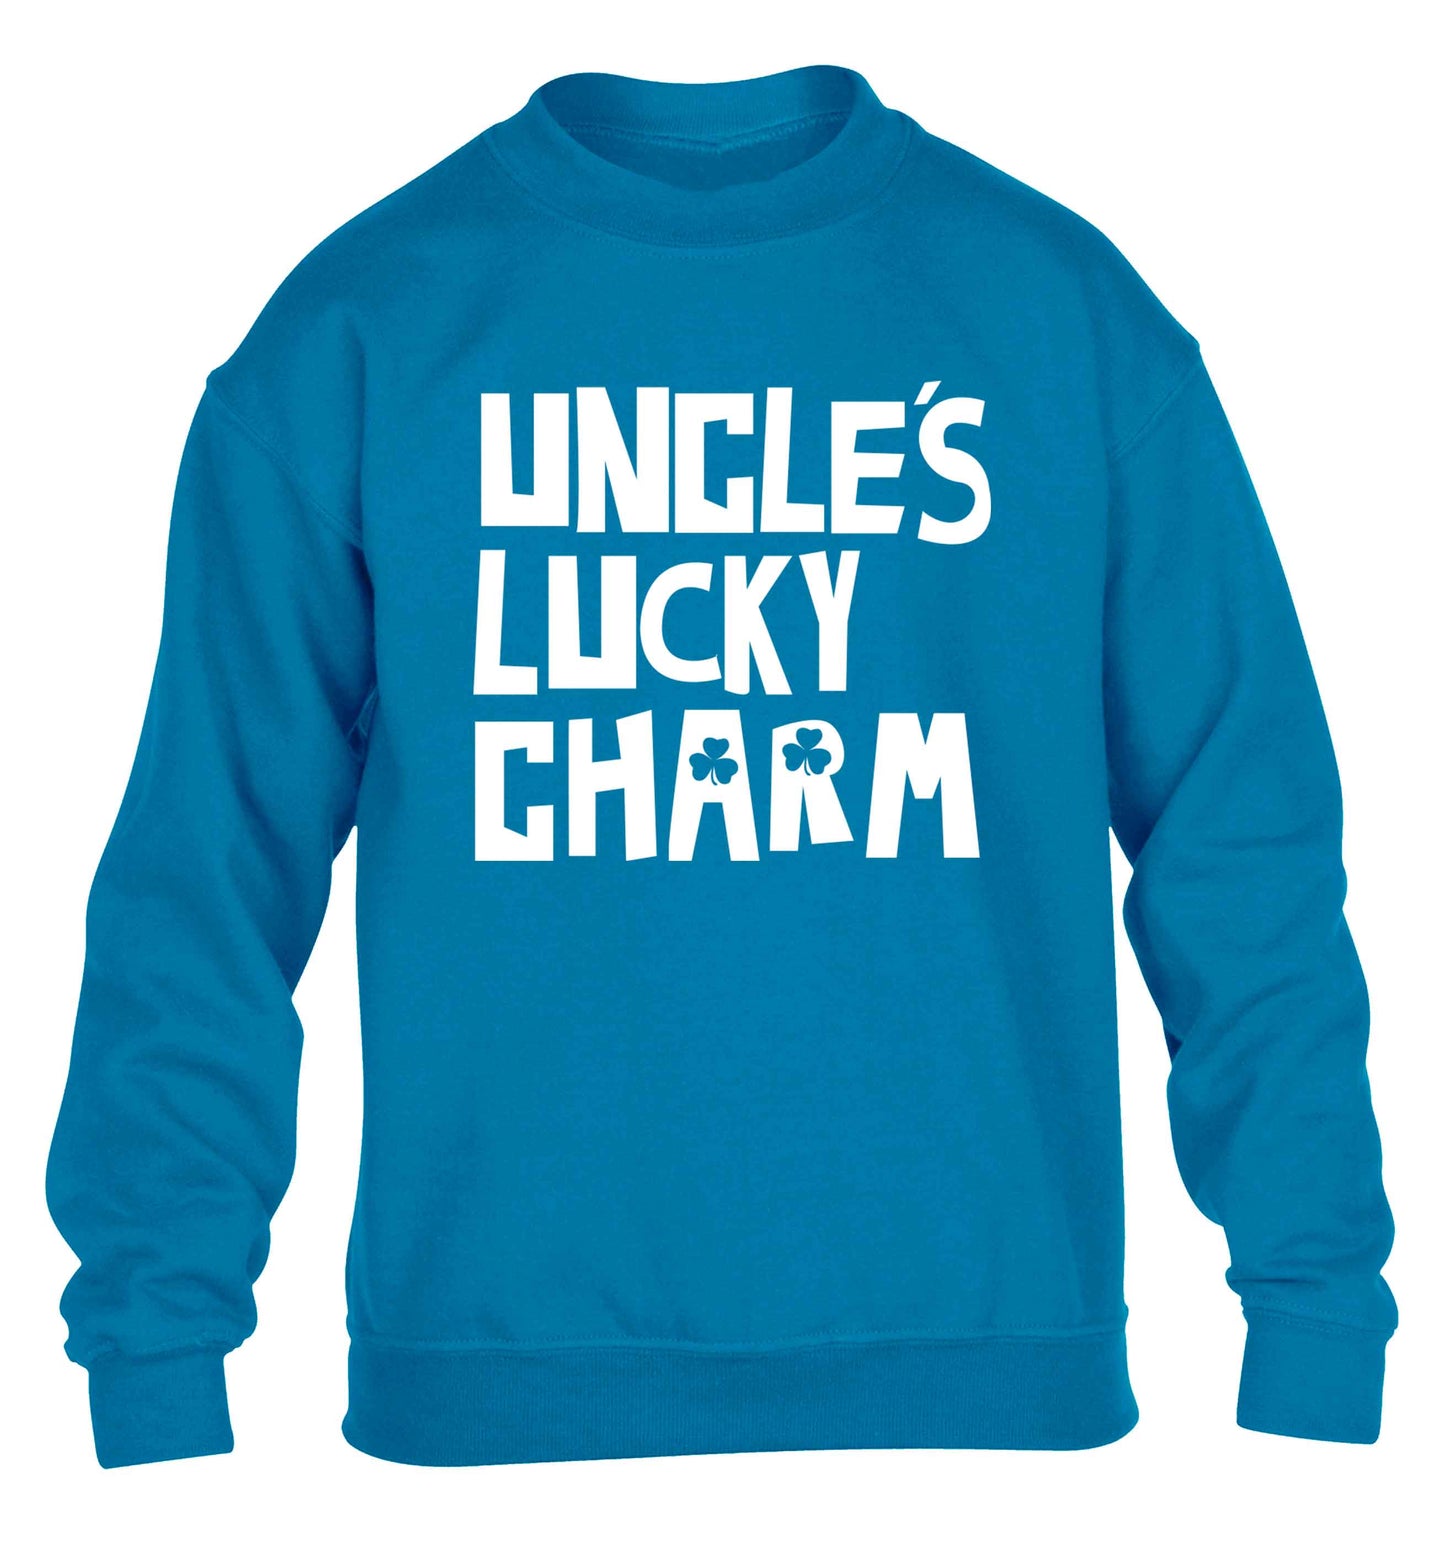 Uncles lucky charm children's blue sweater 12-13 Years